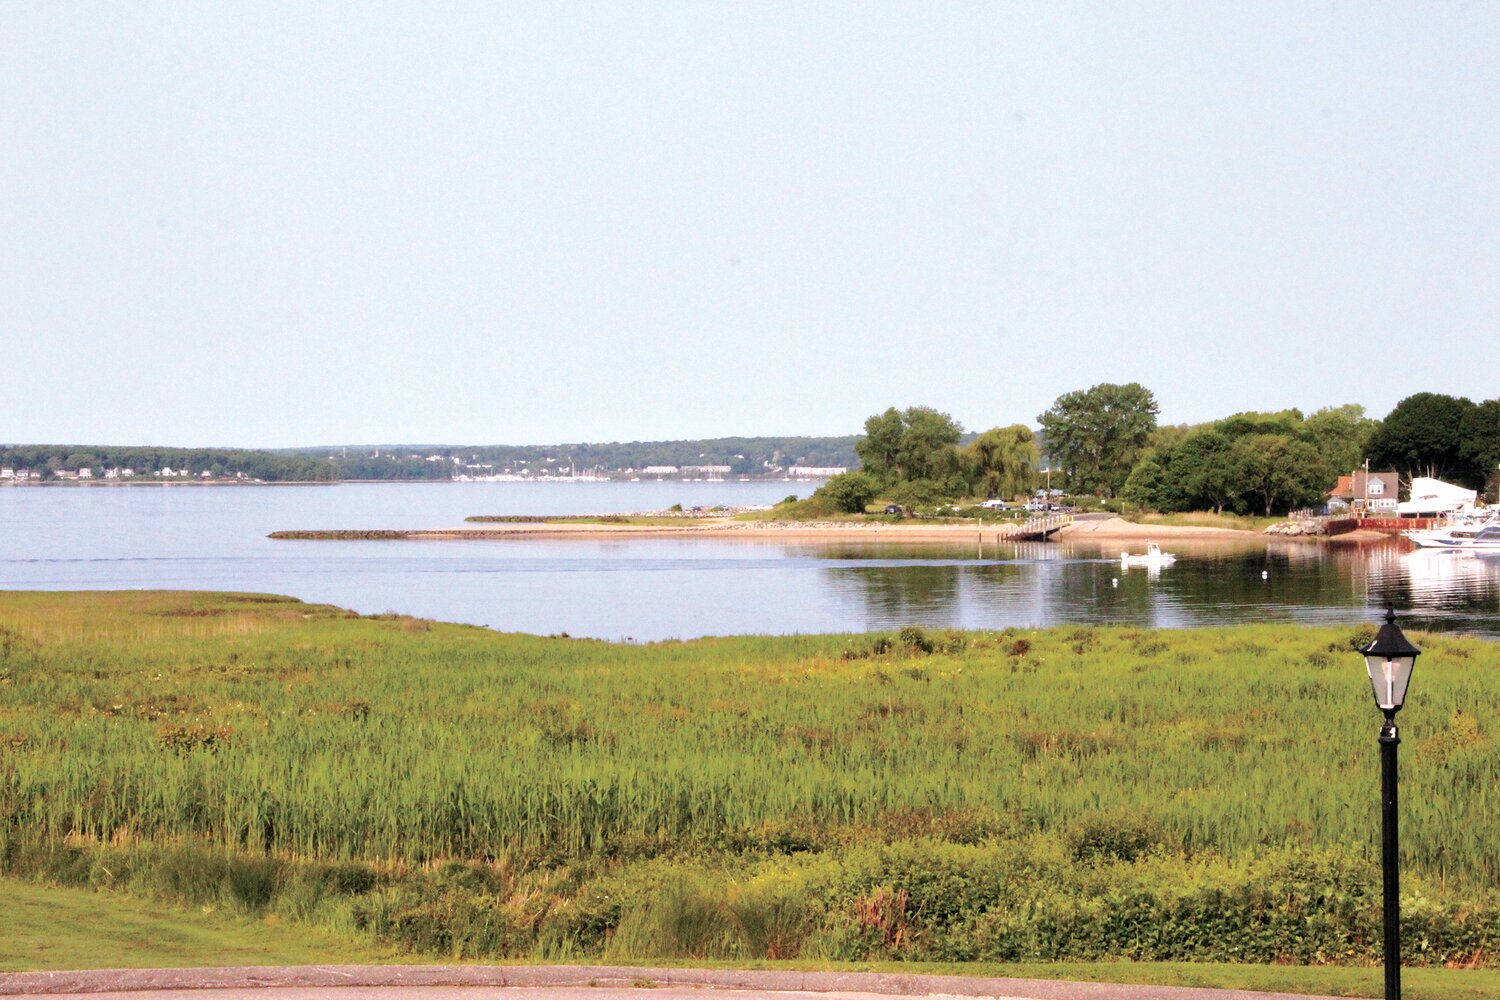 GREAT VIEWS: Guests and golfers can depend on views of Warwick Cove and Greenwich Bay if facing west or the fairways and greens of the 9-hole golf course to their east. (Warwick Beacon photos)